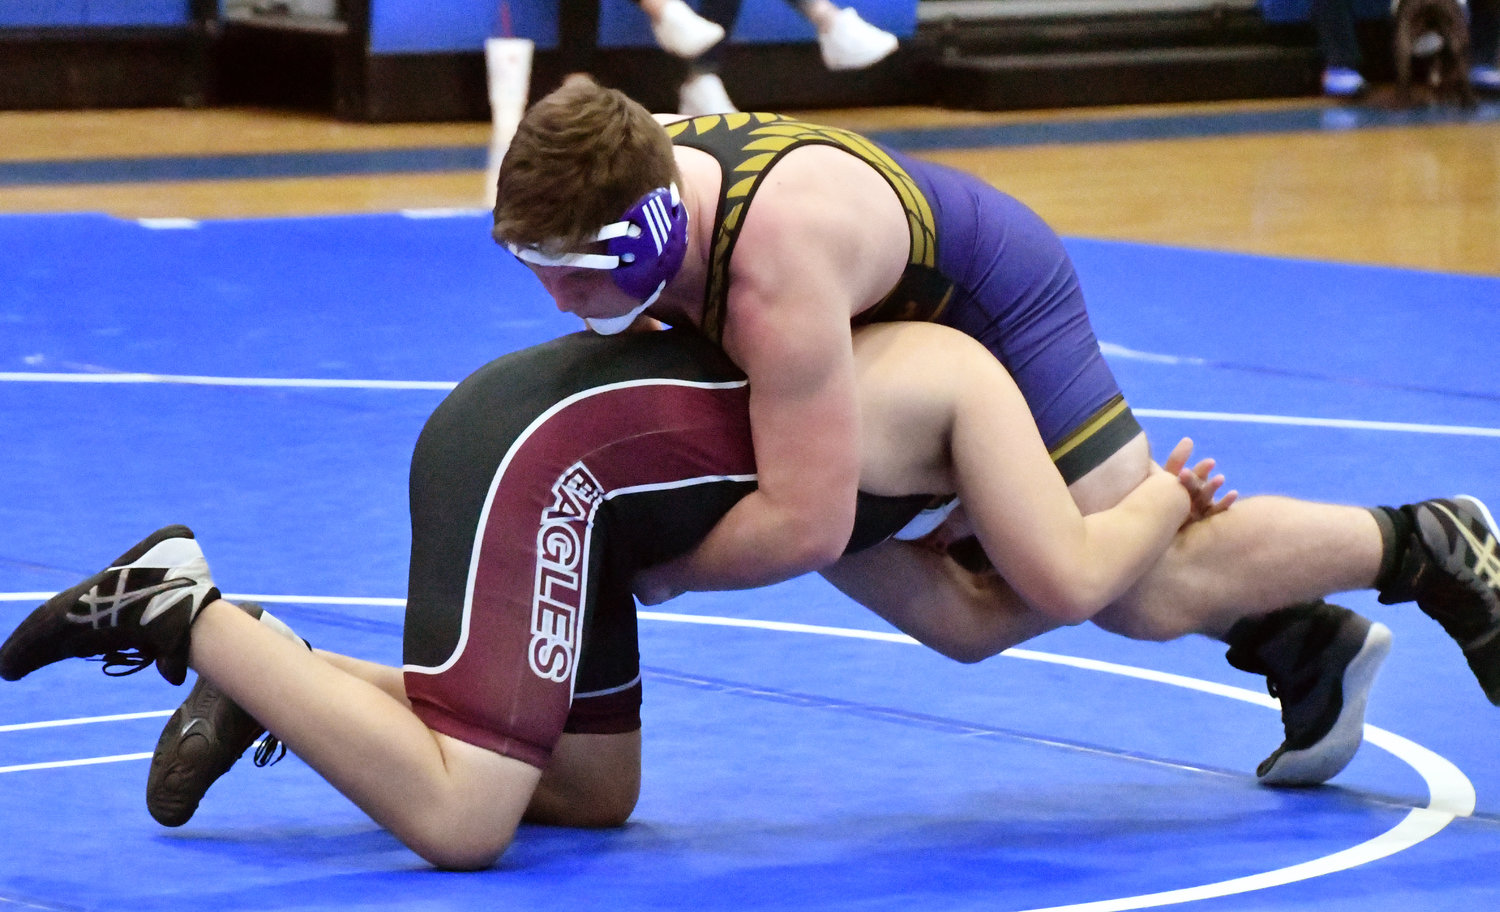 James Bowling of the Vikings gets the win with a pin over his opponent from Eagleville.